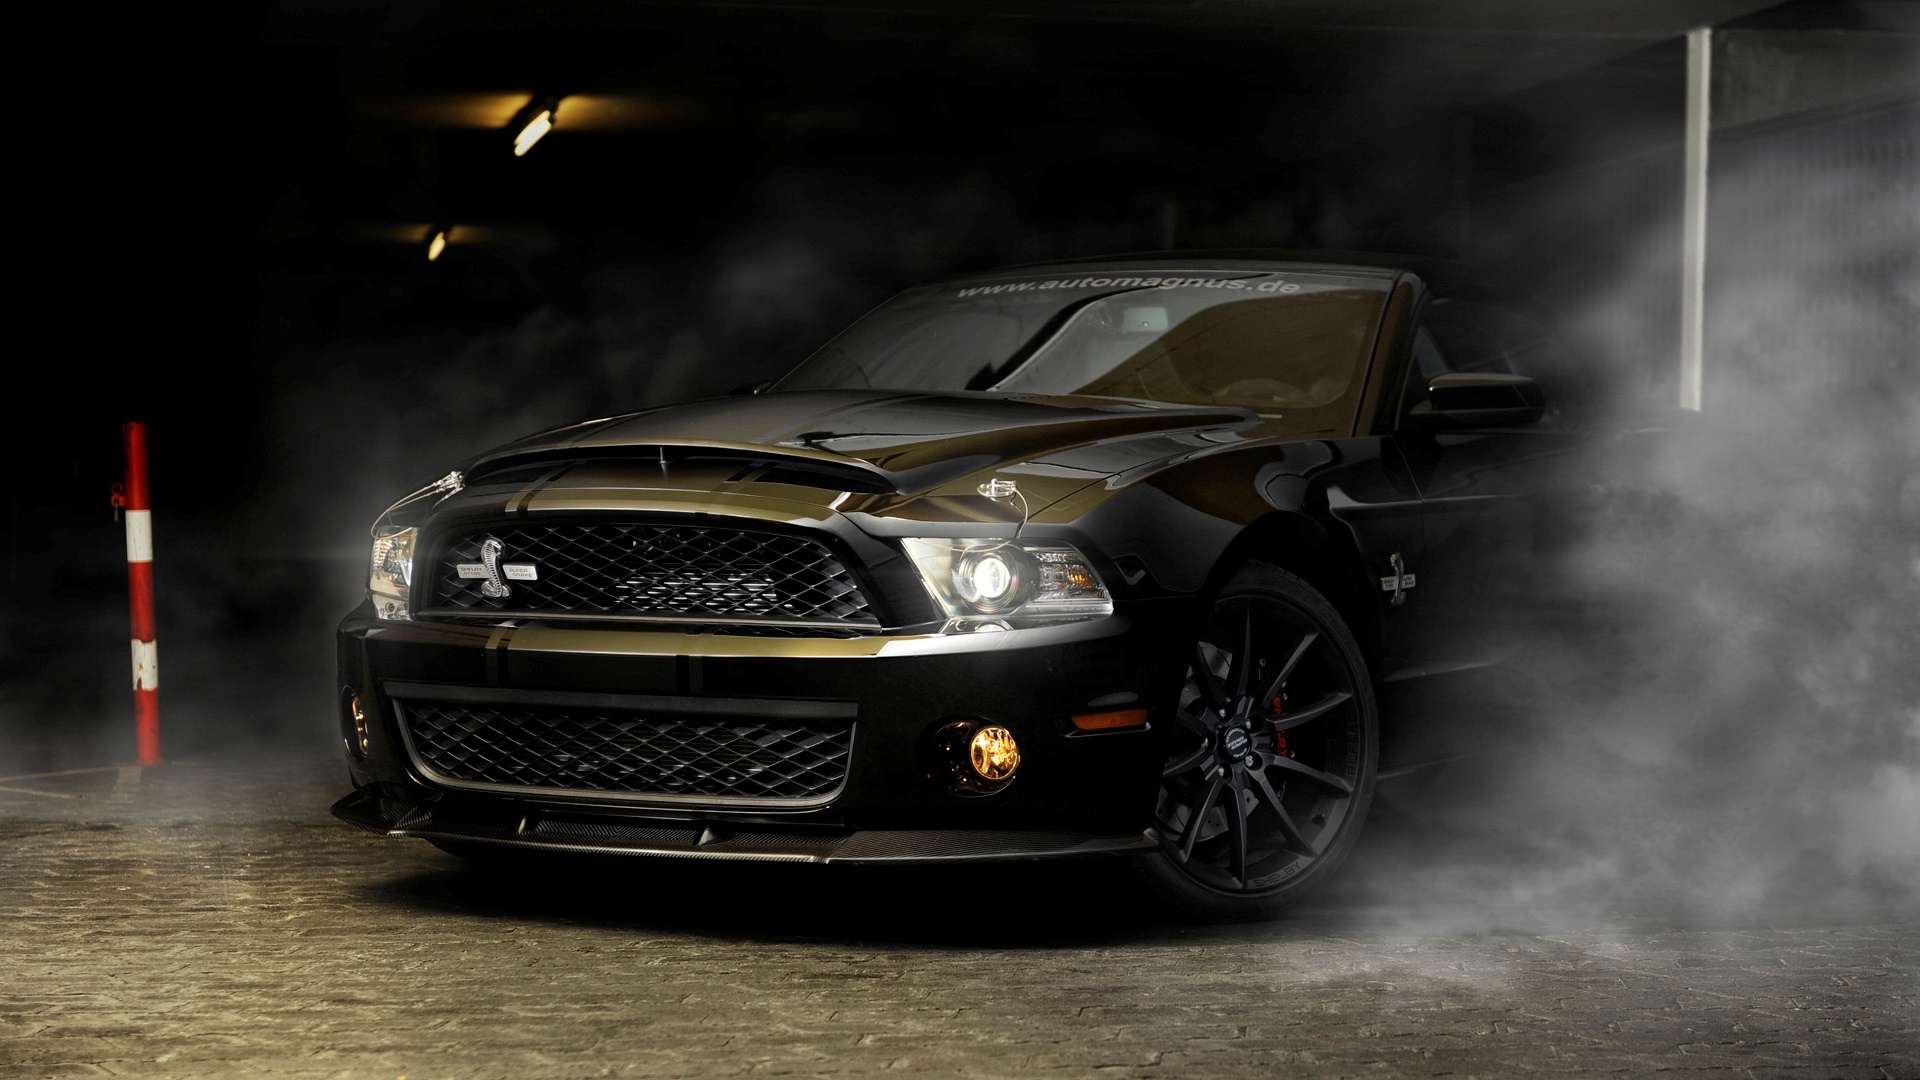 Ford Mustang GT500 Super Snake Shelby Wallpapers 1920x1080